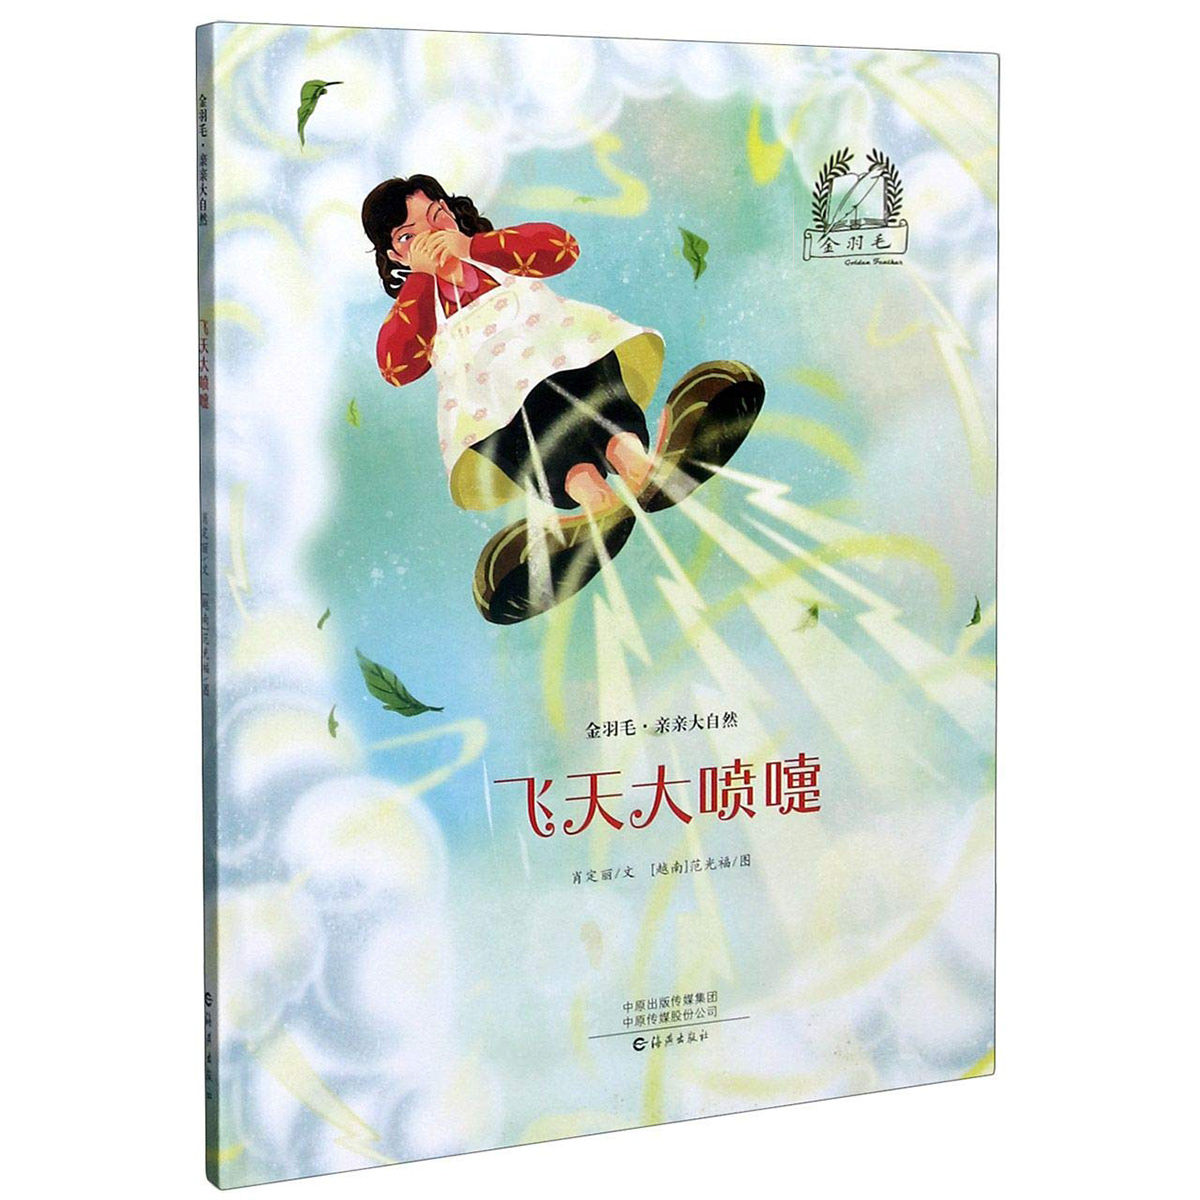 #book #children's book #Chinese #environment #folktale #magical #vietnam fantasy Picture book picturebook